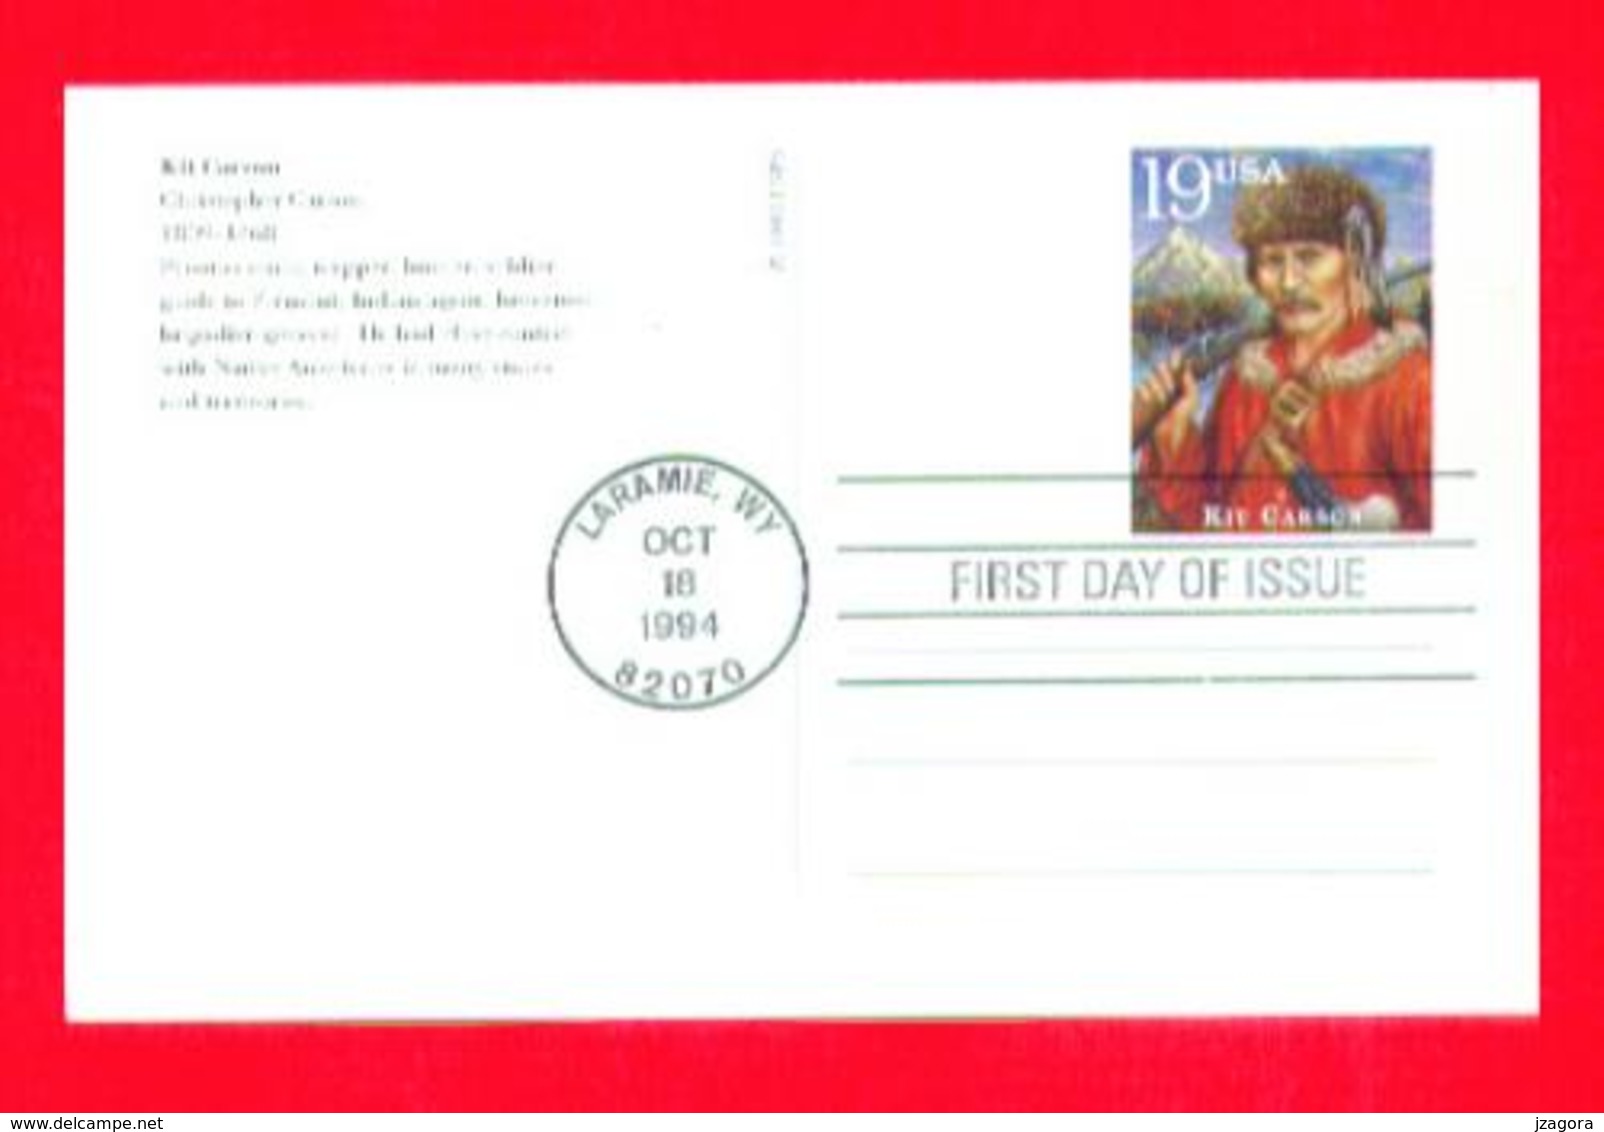 LEGENDS OF WILD WEST - KIT CARSON USA 1994 FDC UX 191 PRE-PAID POST CARD Law  Prepaid - Indianen